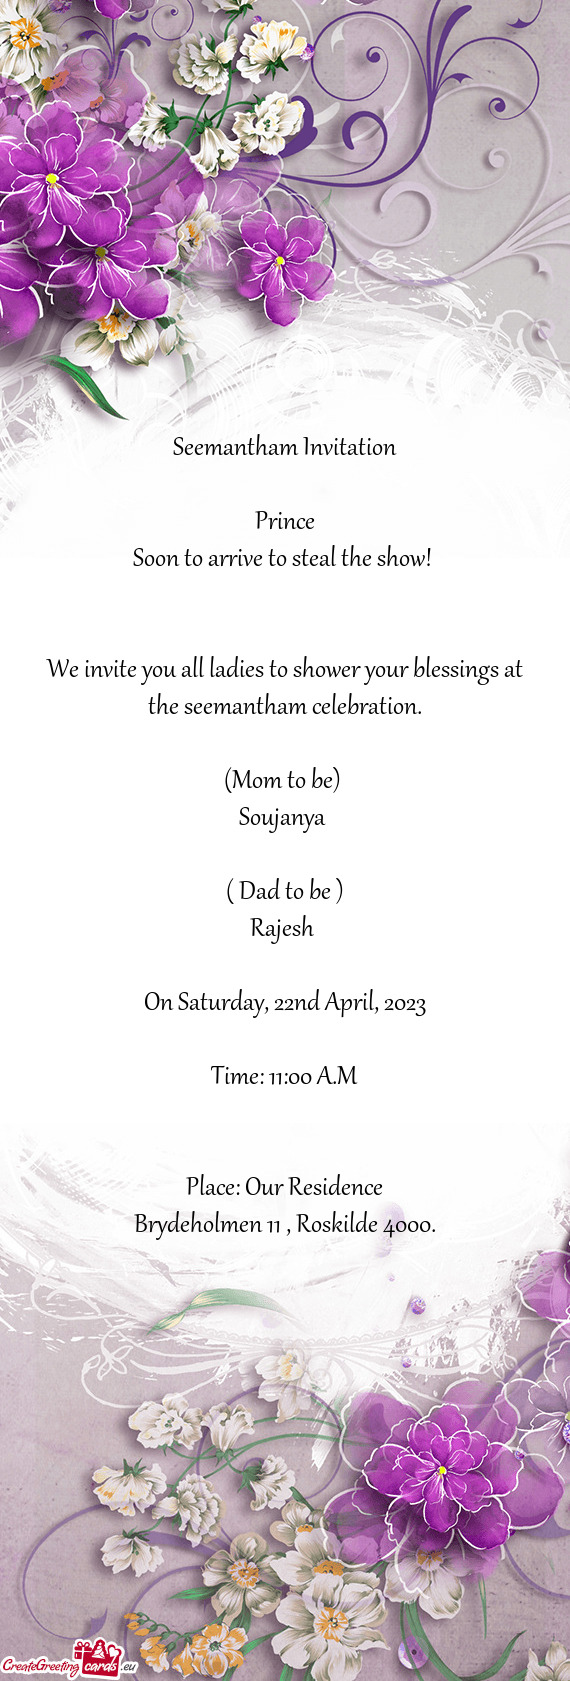 We invite you all ladies to shower your blessings at the seemantham celebration